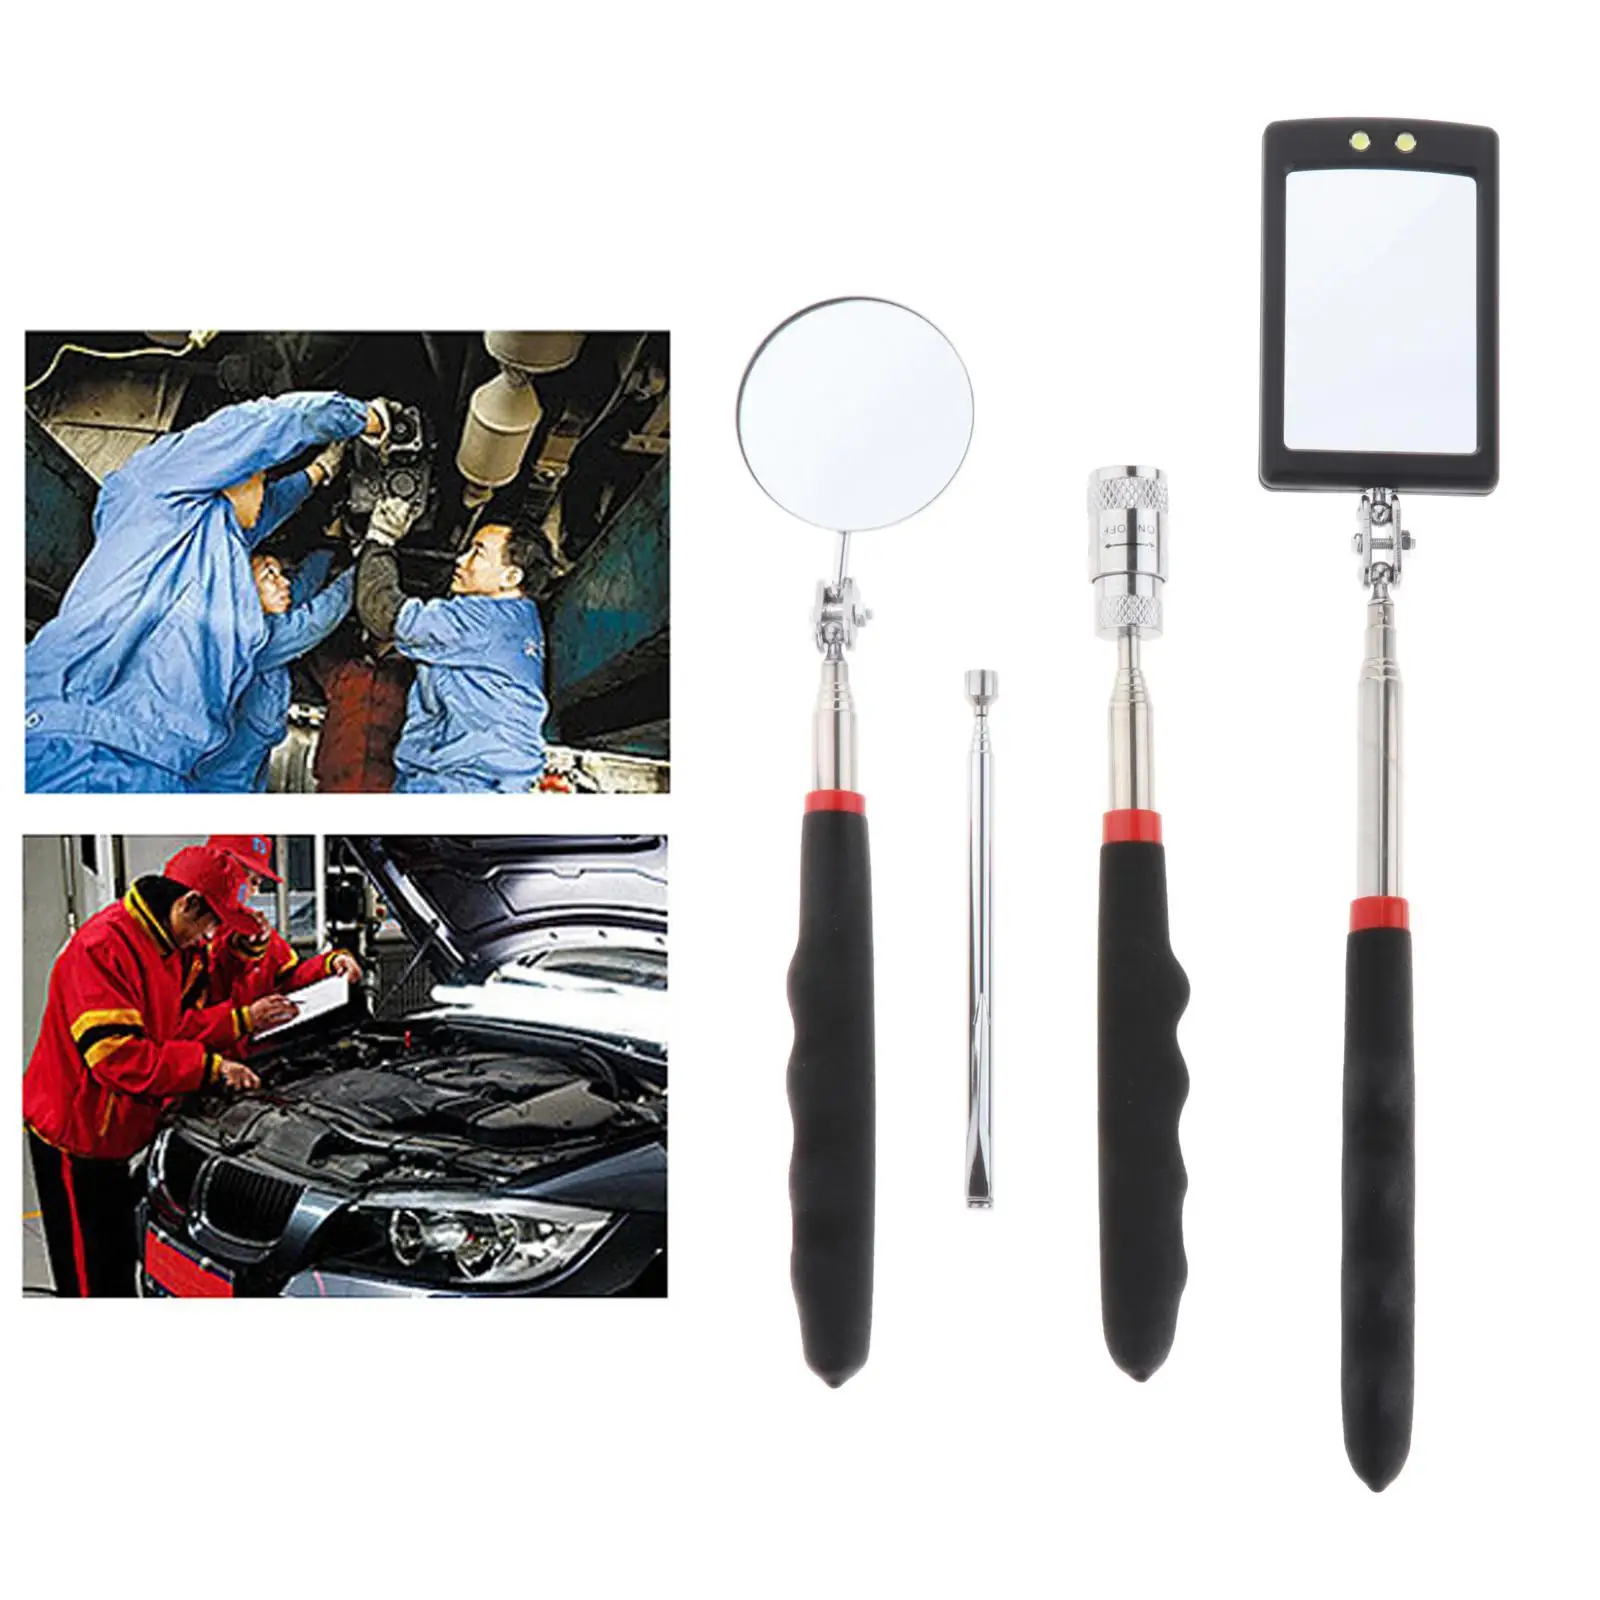  Telescoping Pickup Tool Set Telescoping Handle 360 Swivel Adjustable Mirror with Handle Retractable Fit for Car Maintenance